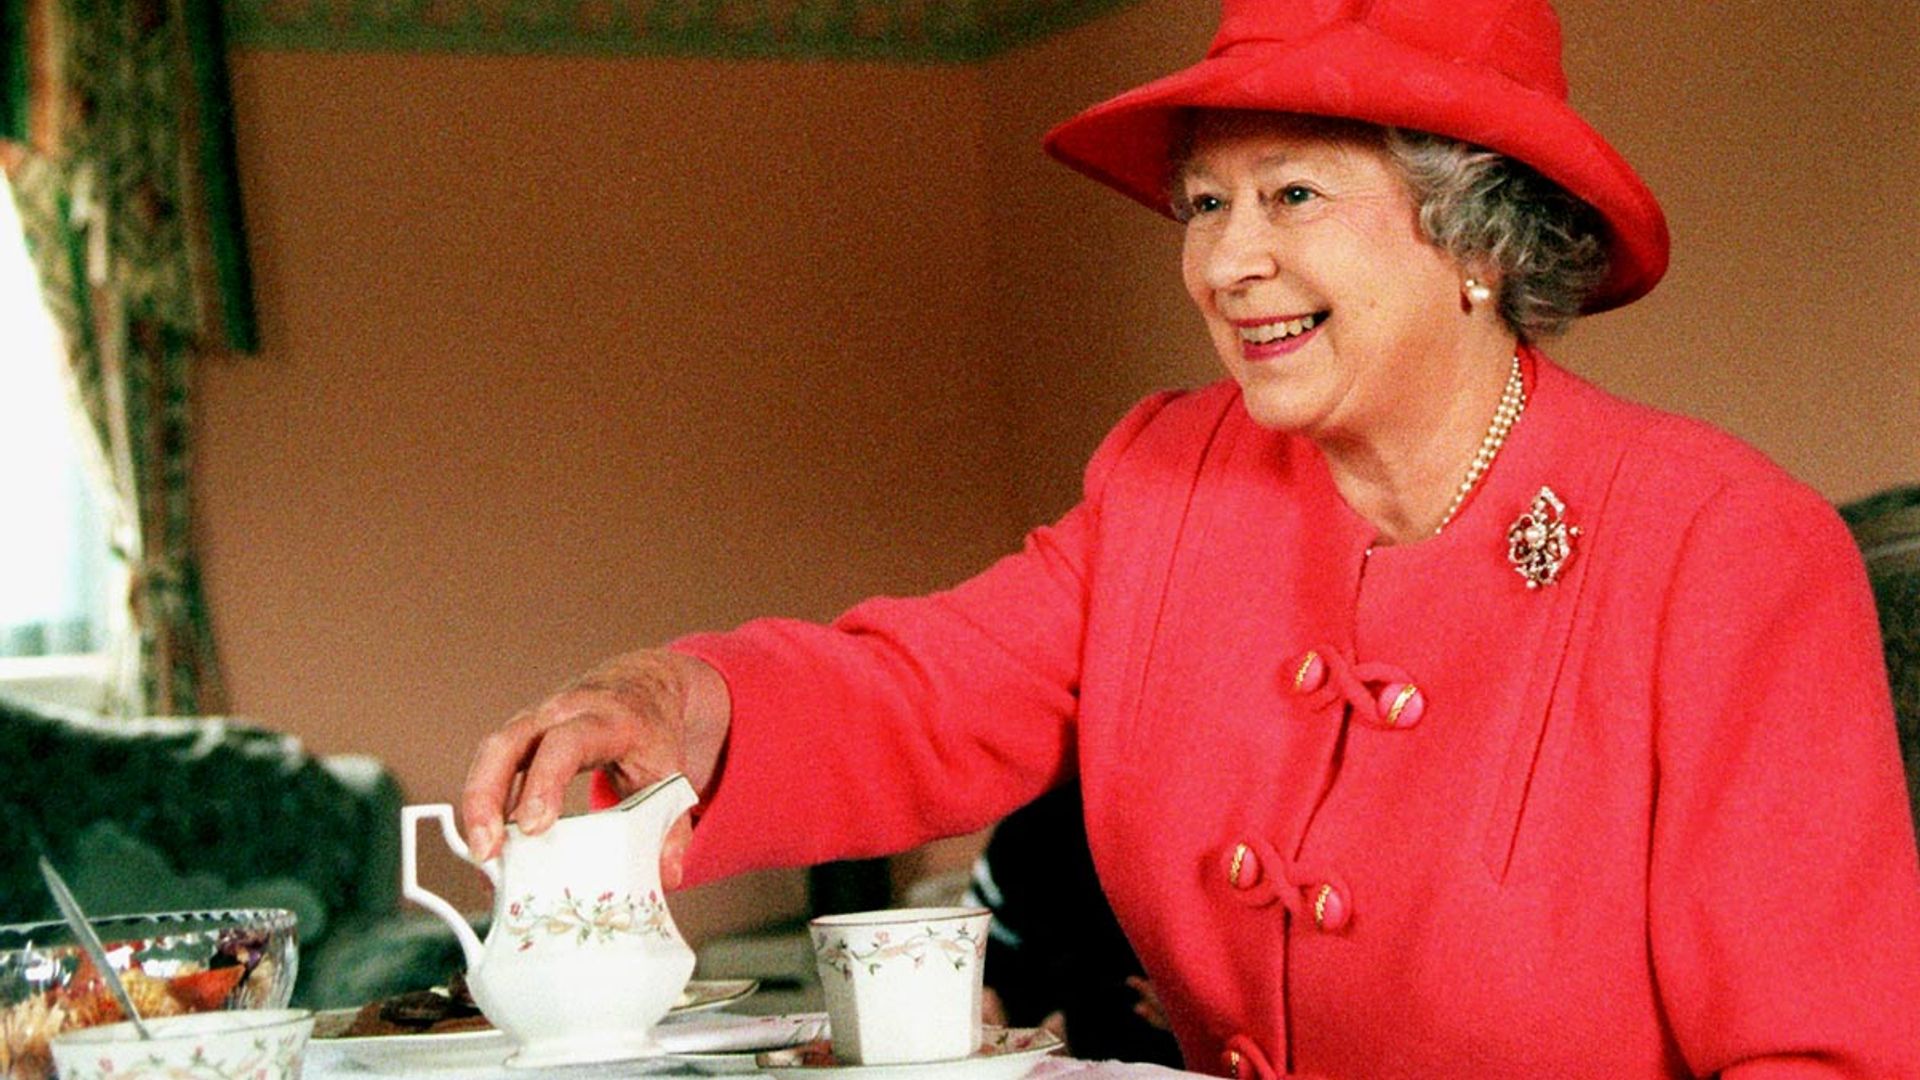 The Queen's former royal chef's latest dessert recipe may be the easiest yet